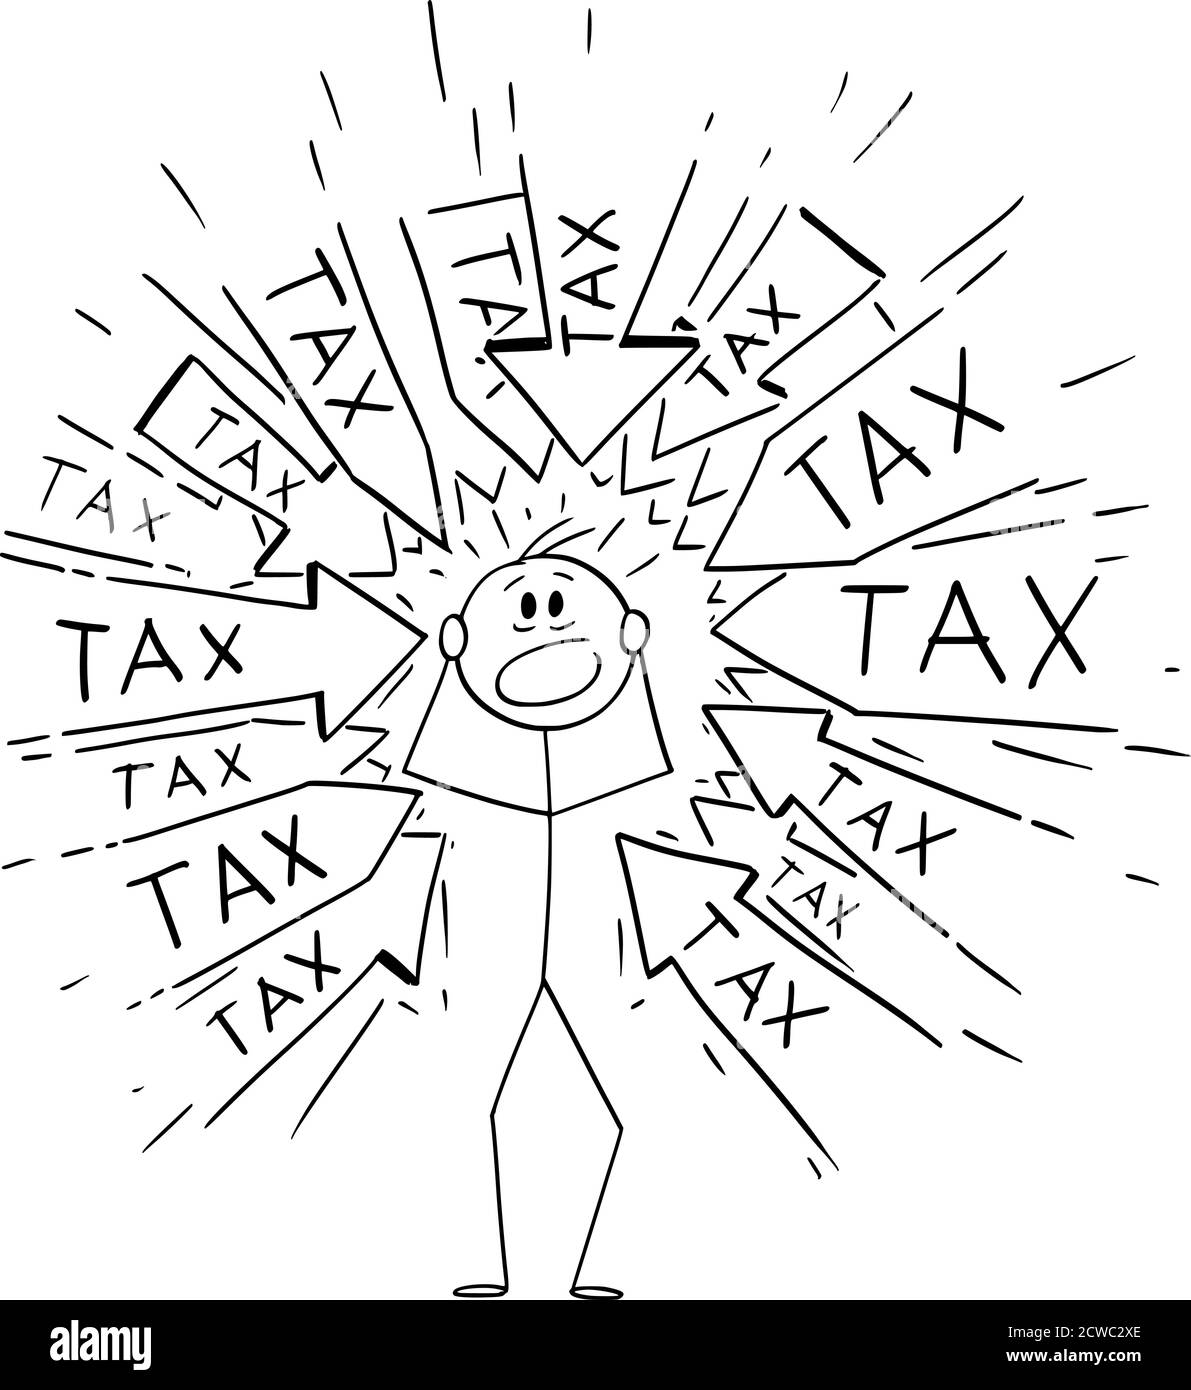 Vector cartoon stick figure drawing conceptual illustration of stressed man or businessman with many arrows pointing at him requesting to pay tax or taxes. Financial concept. Stock Vector